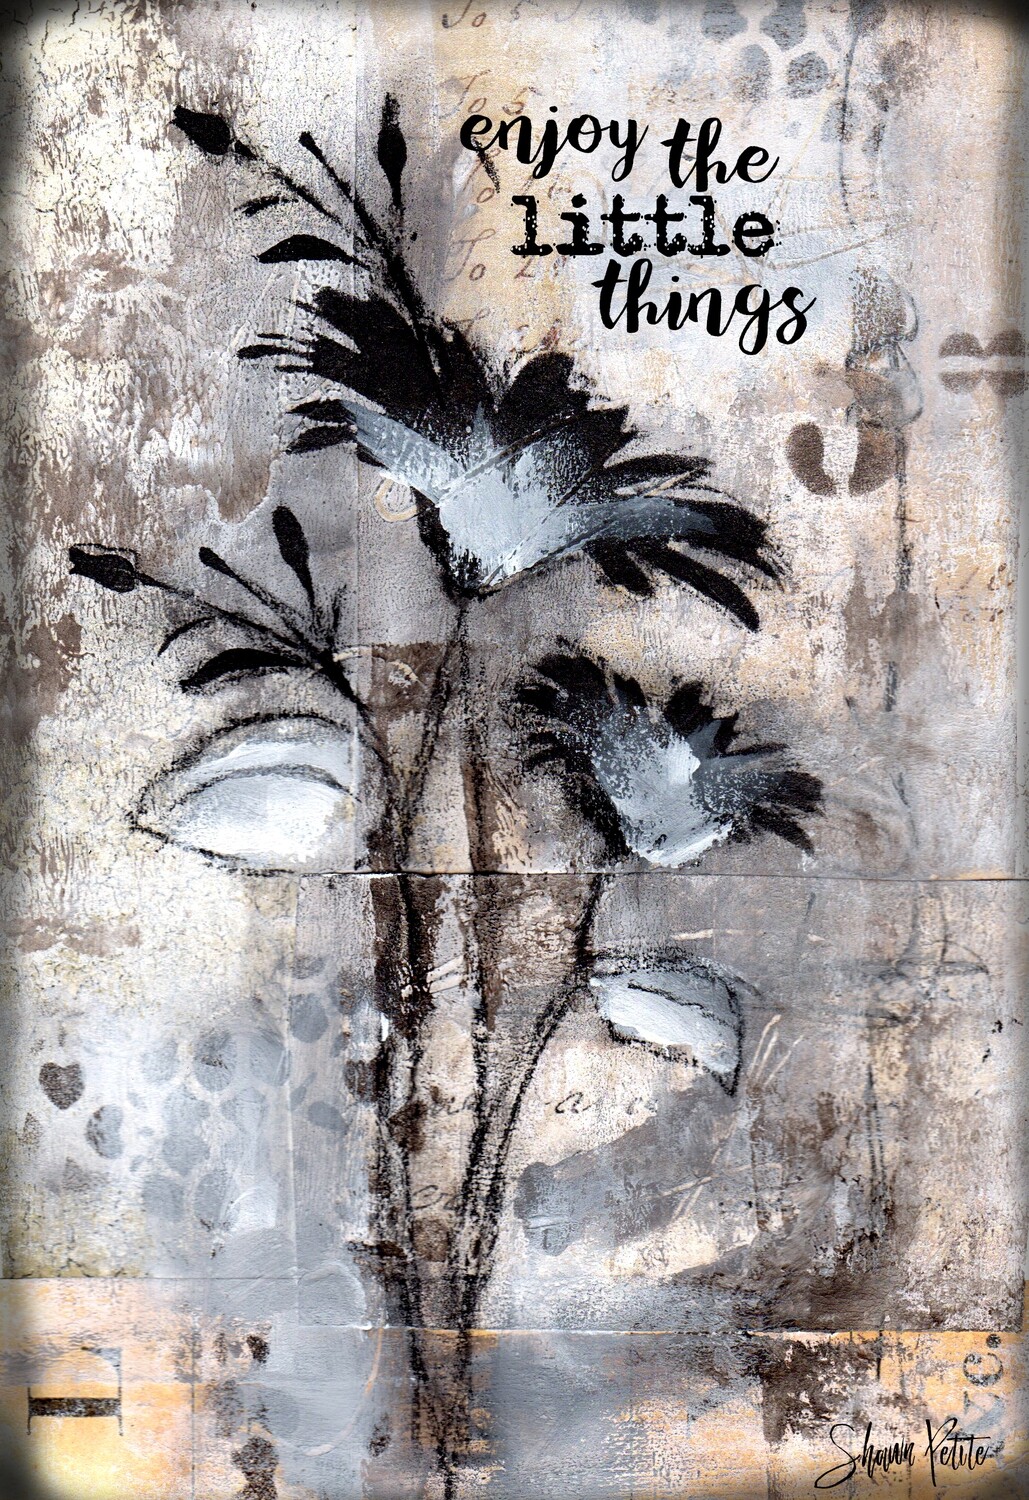 "Enjoy the little things" Print on Wood 4x6 Overstock